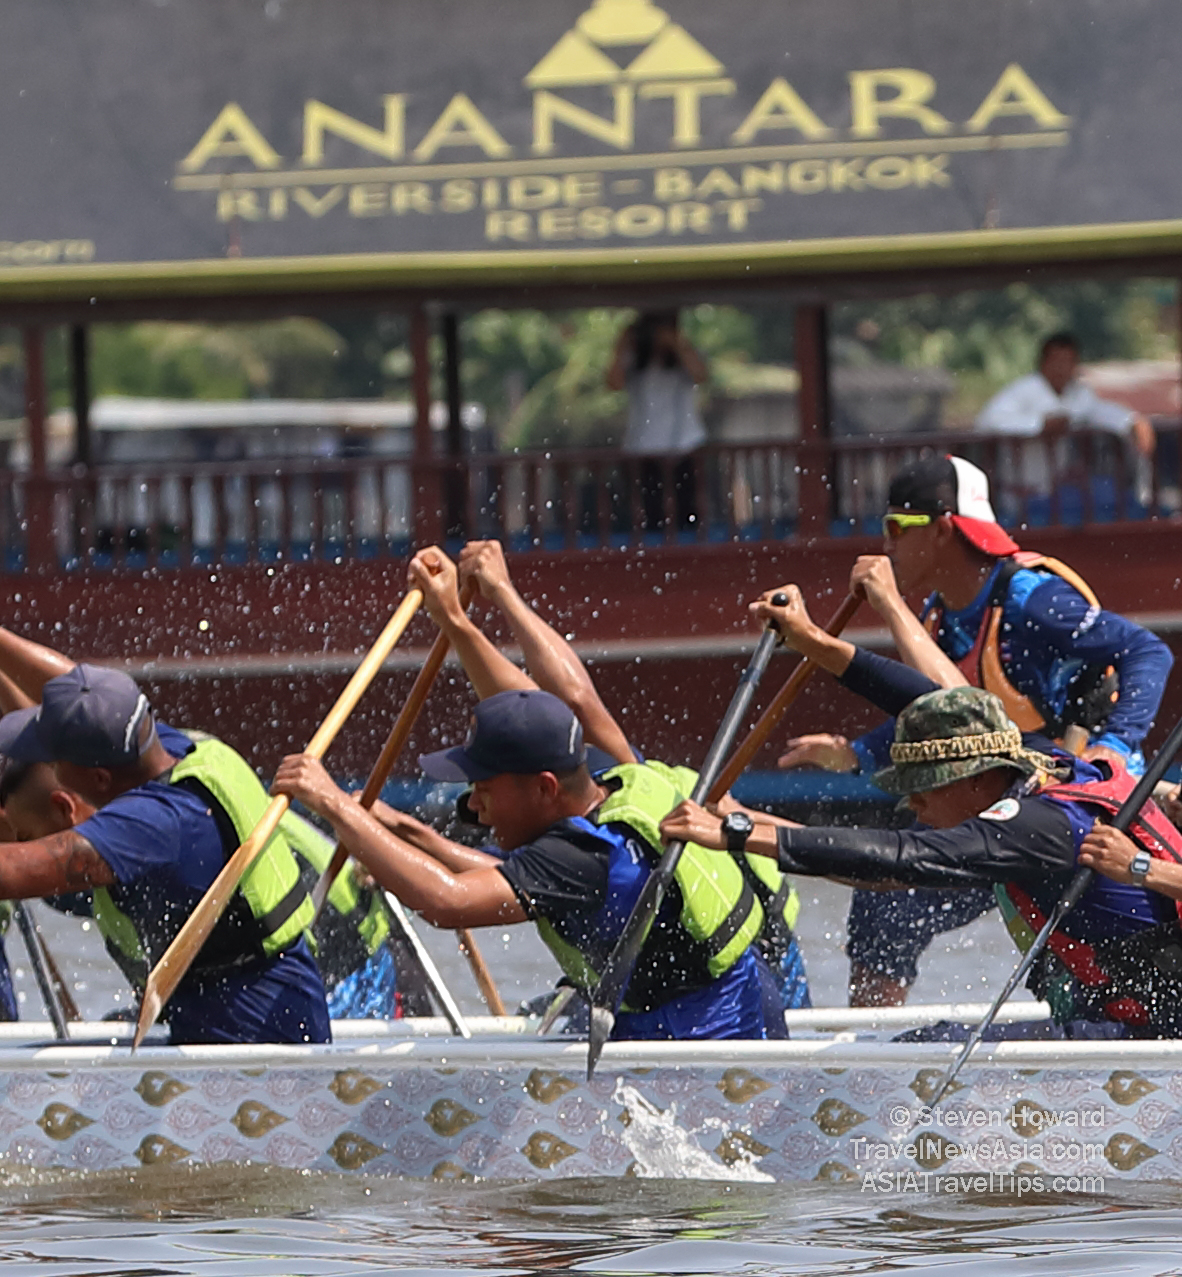 Pictures of Kings' Cup Bangkok Elephant Boat Race & River Festival 2019